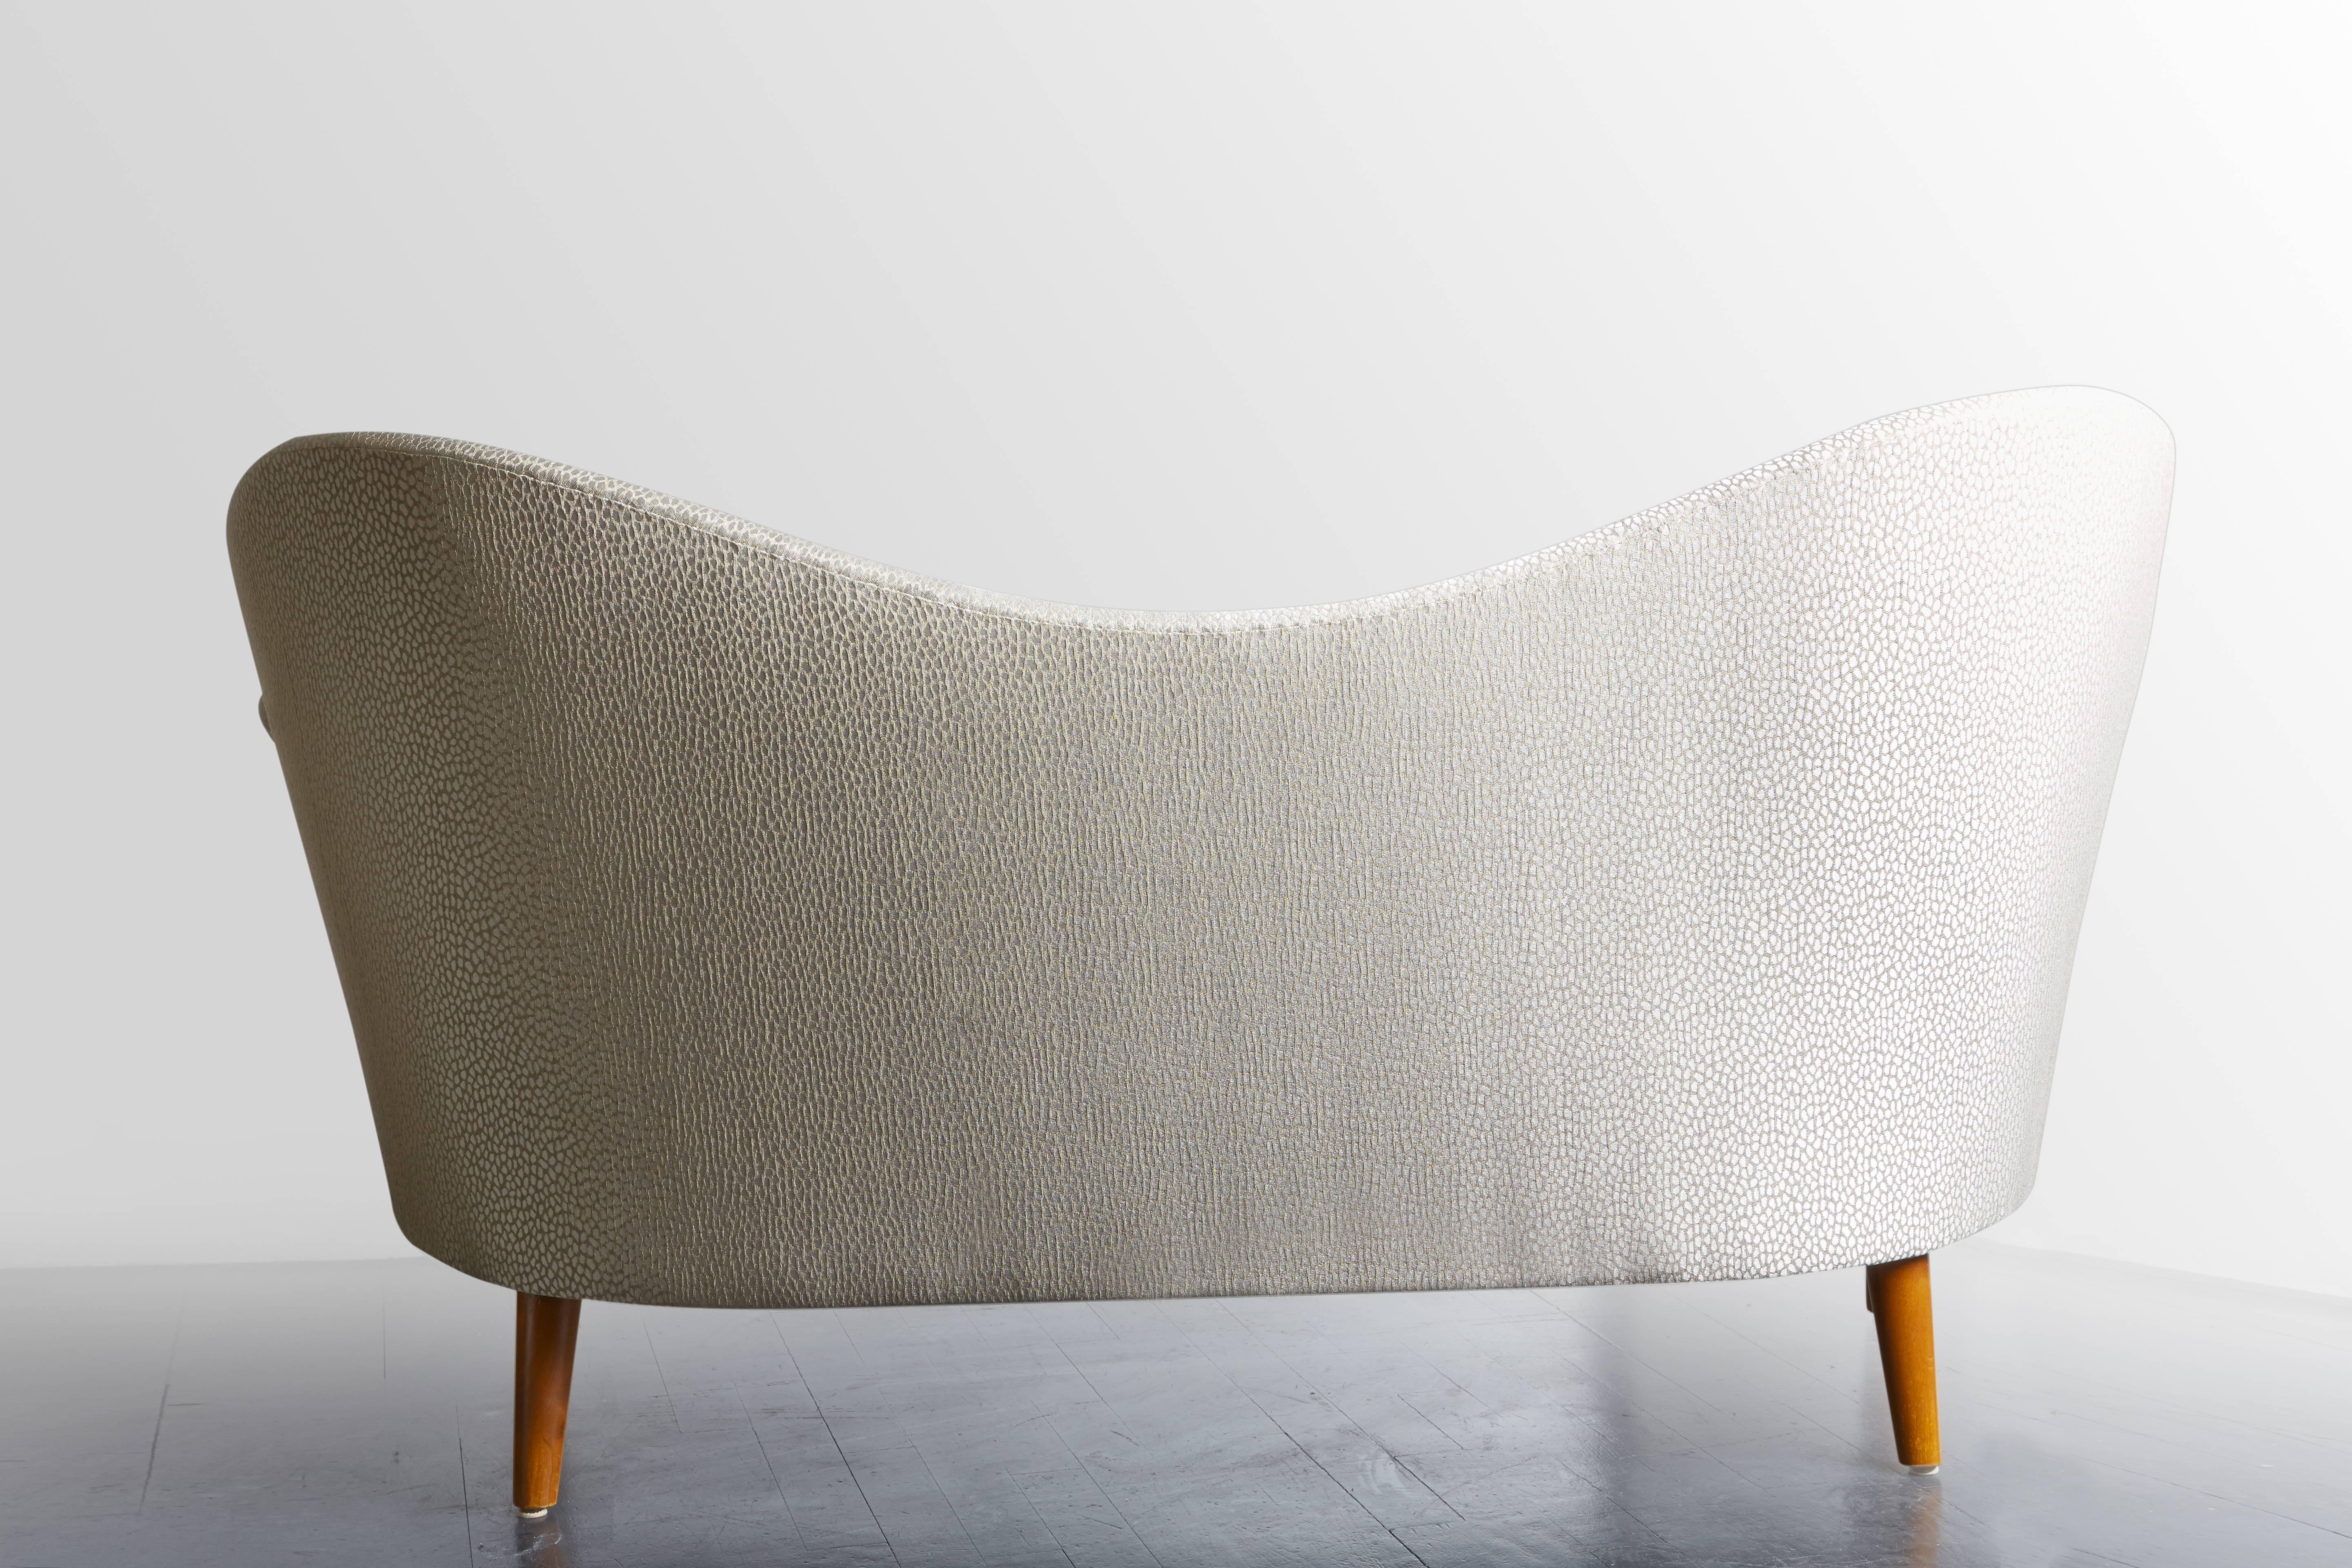 Sofa entitled “Sampsel” in beechwood, designed and edited by Carl Malmsten in 1950. Swedish work, reupholstered with Rubelli fabric.